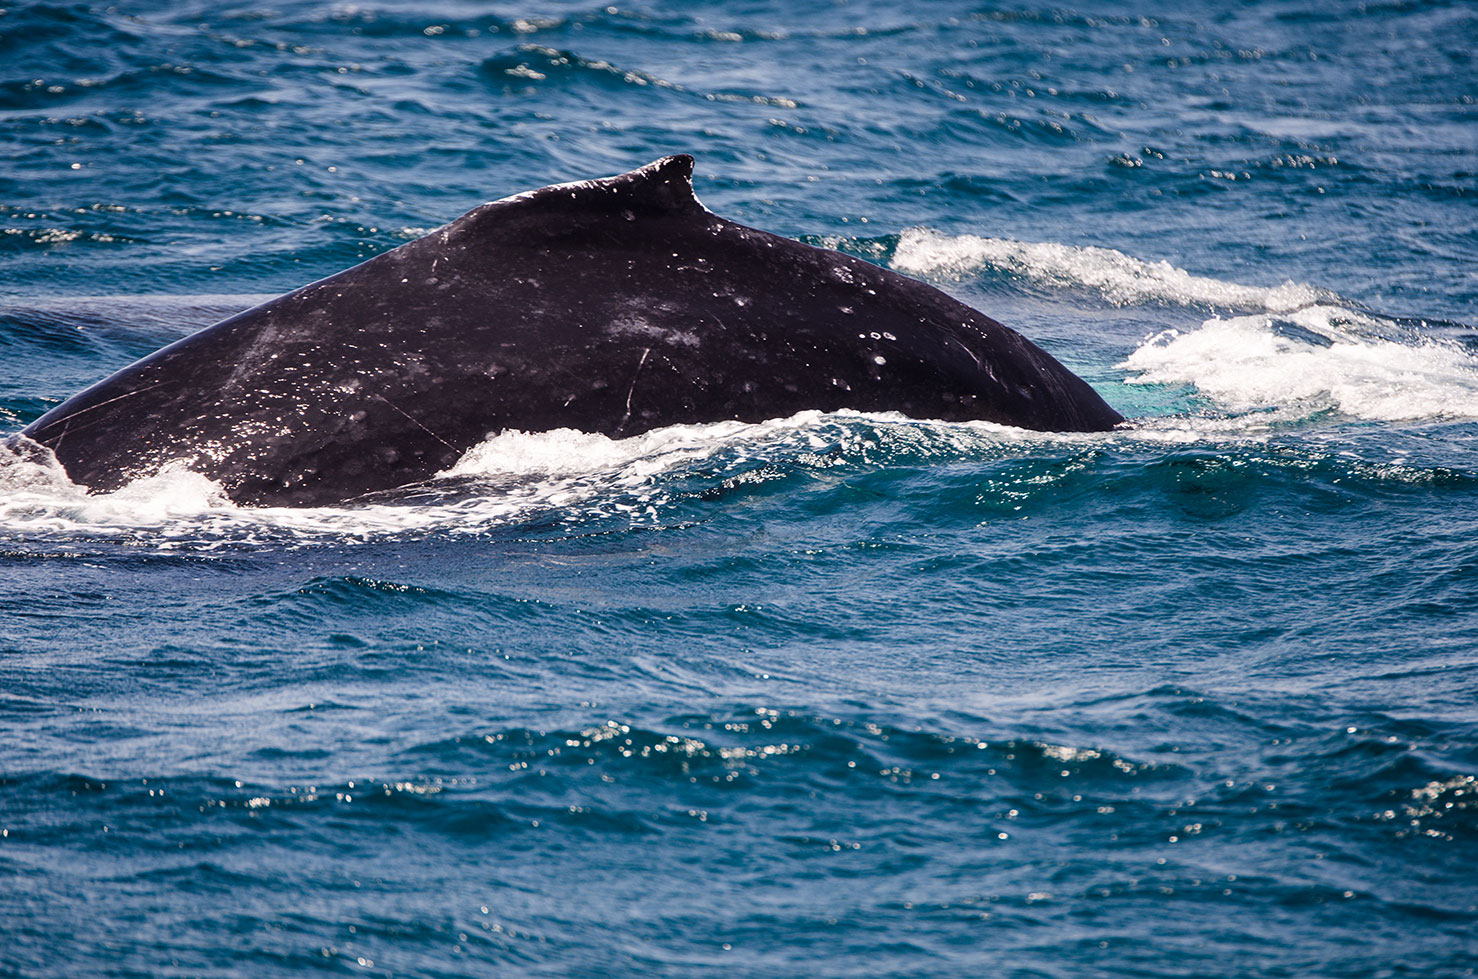 Whale Watching, San Mateo, 31 August 2019